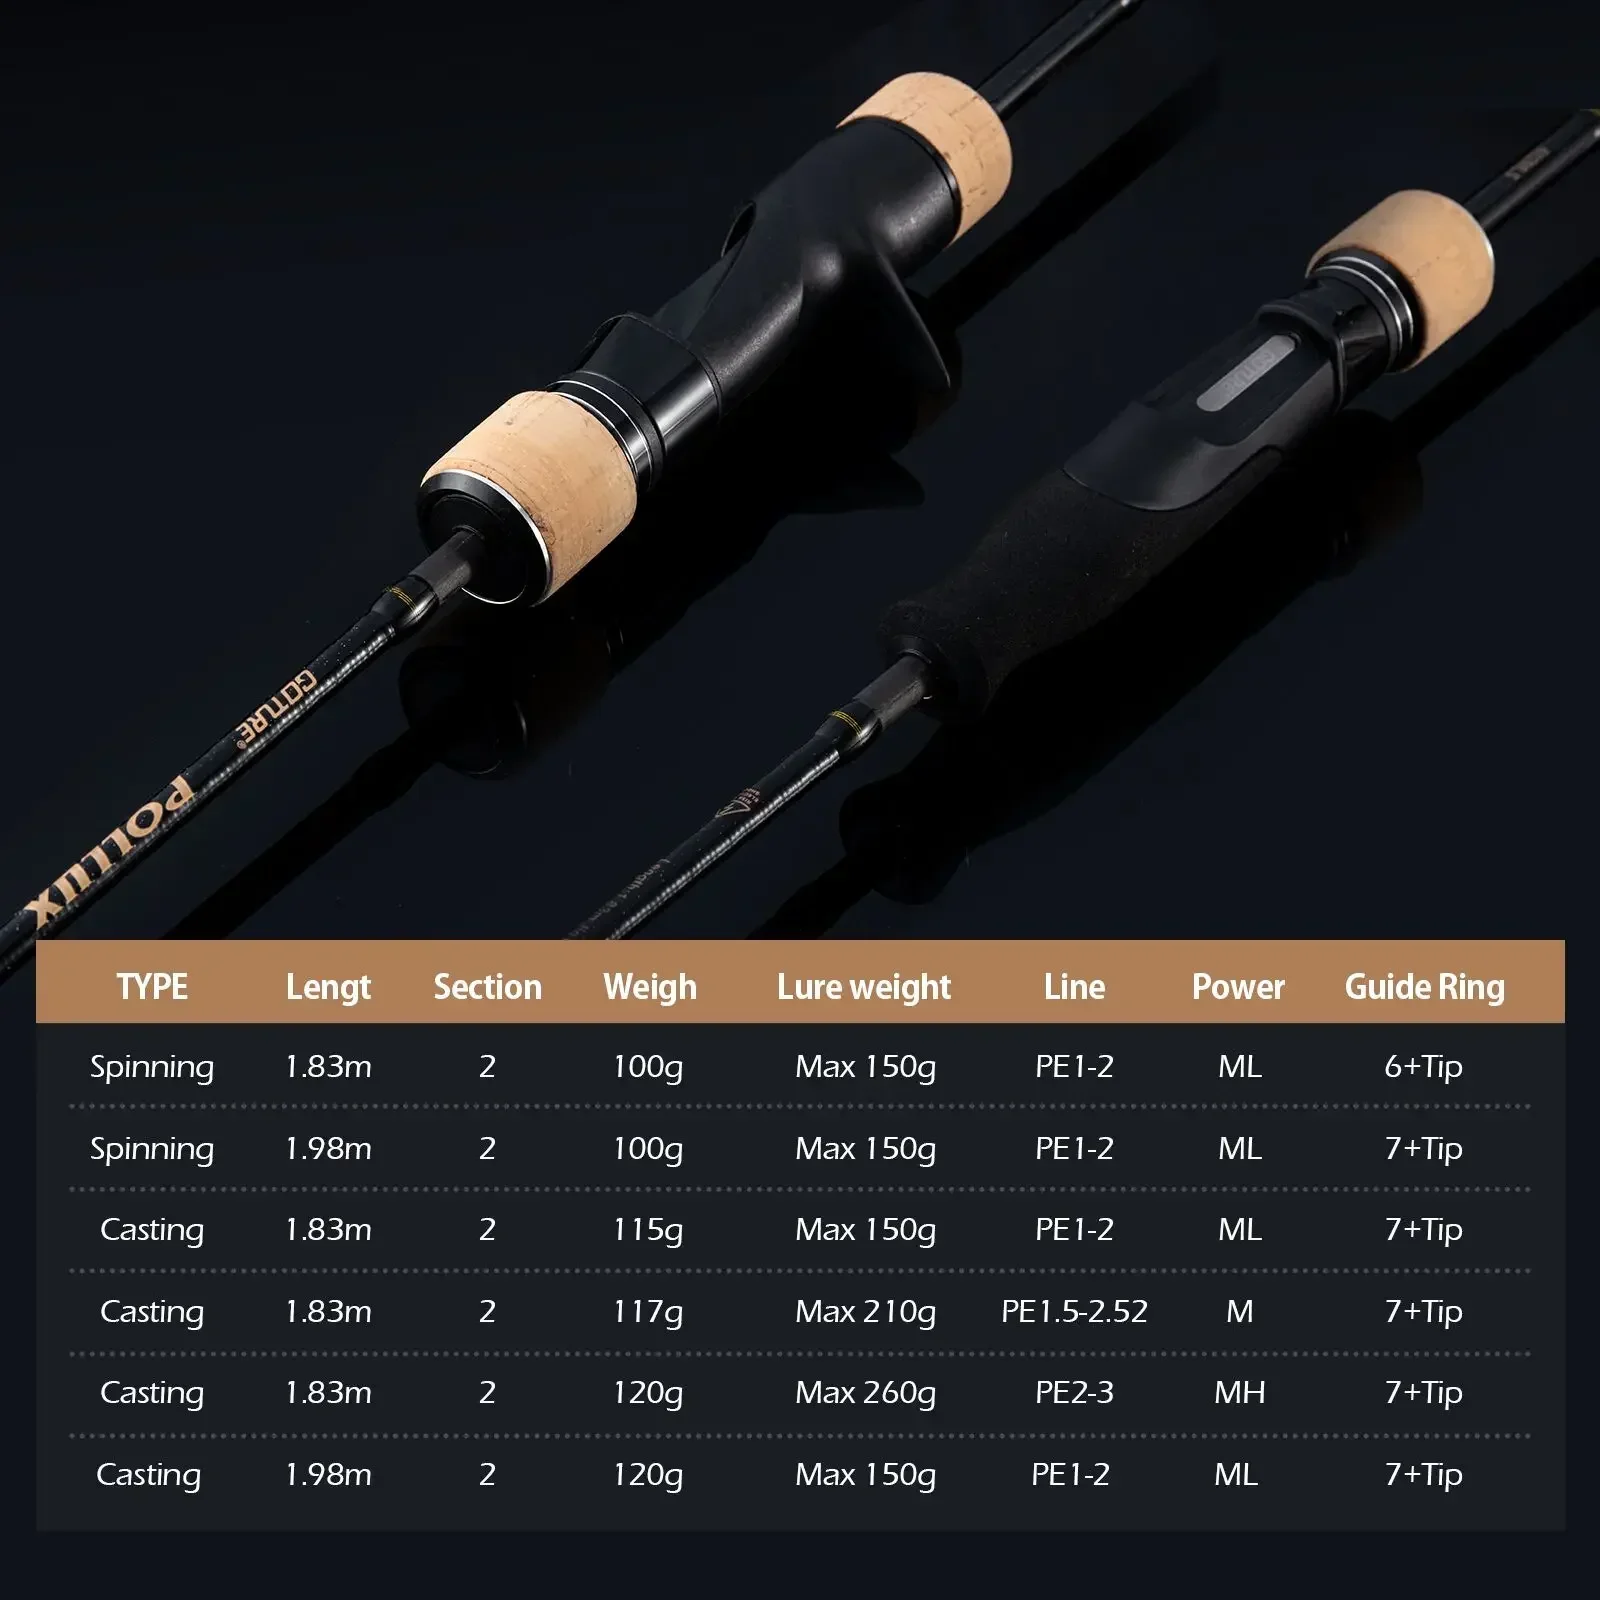 Goture Pollux Slow Fast Boat Rod 100%Fuji Guide Ring Jigging Fishing Rod  1.83m 1.98m Spinning/Casting ML M MH Action Sea pole